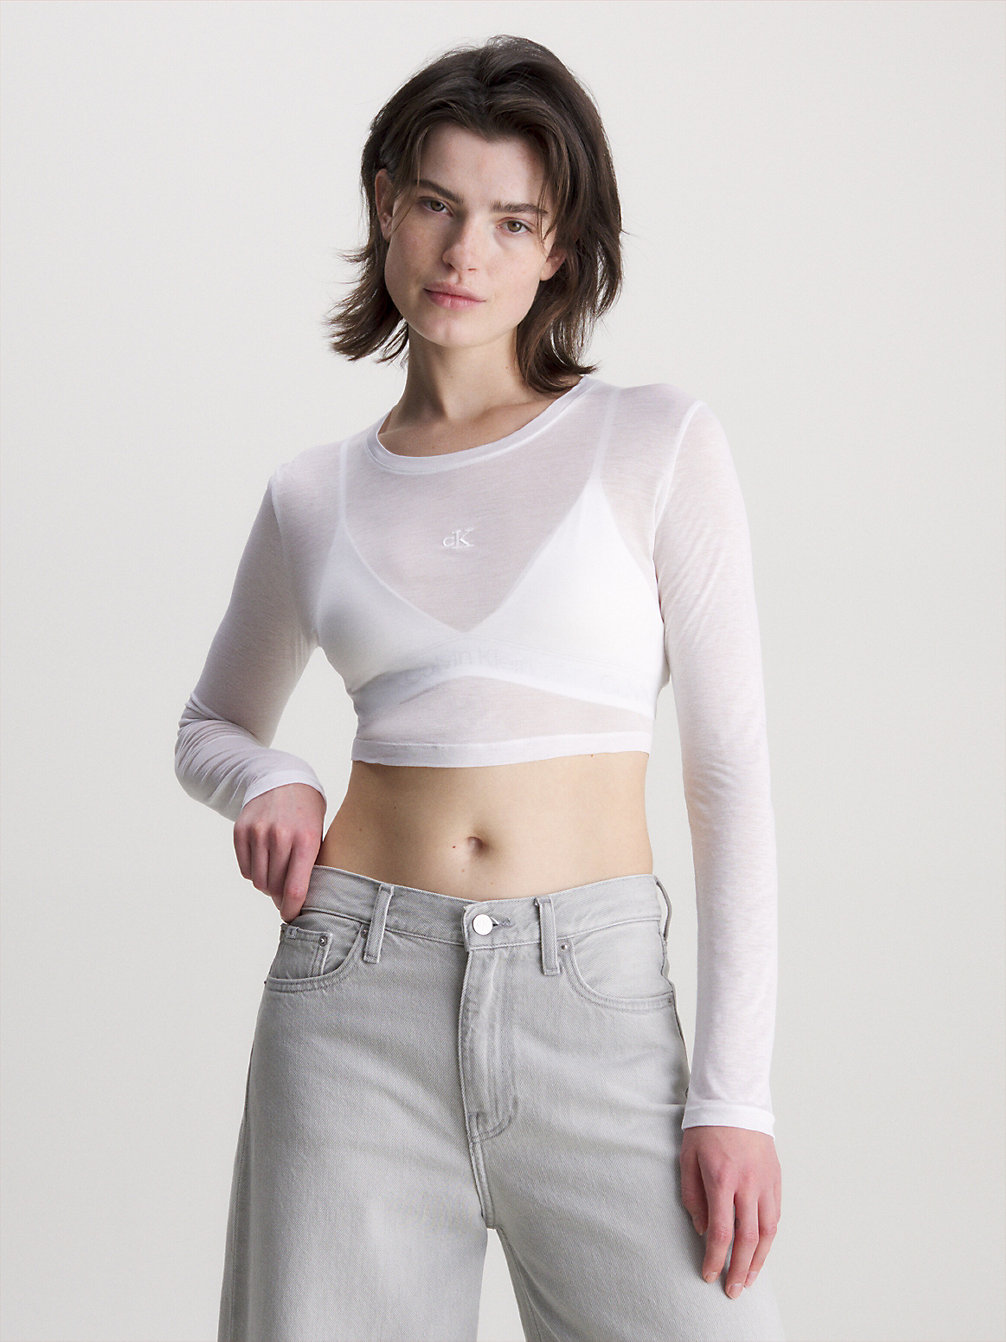 BRIGHT WHITE Sheer Cropped Long Sleeve Top undefined women Calvin Klein